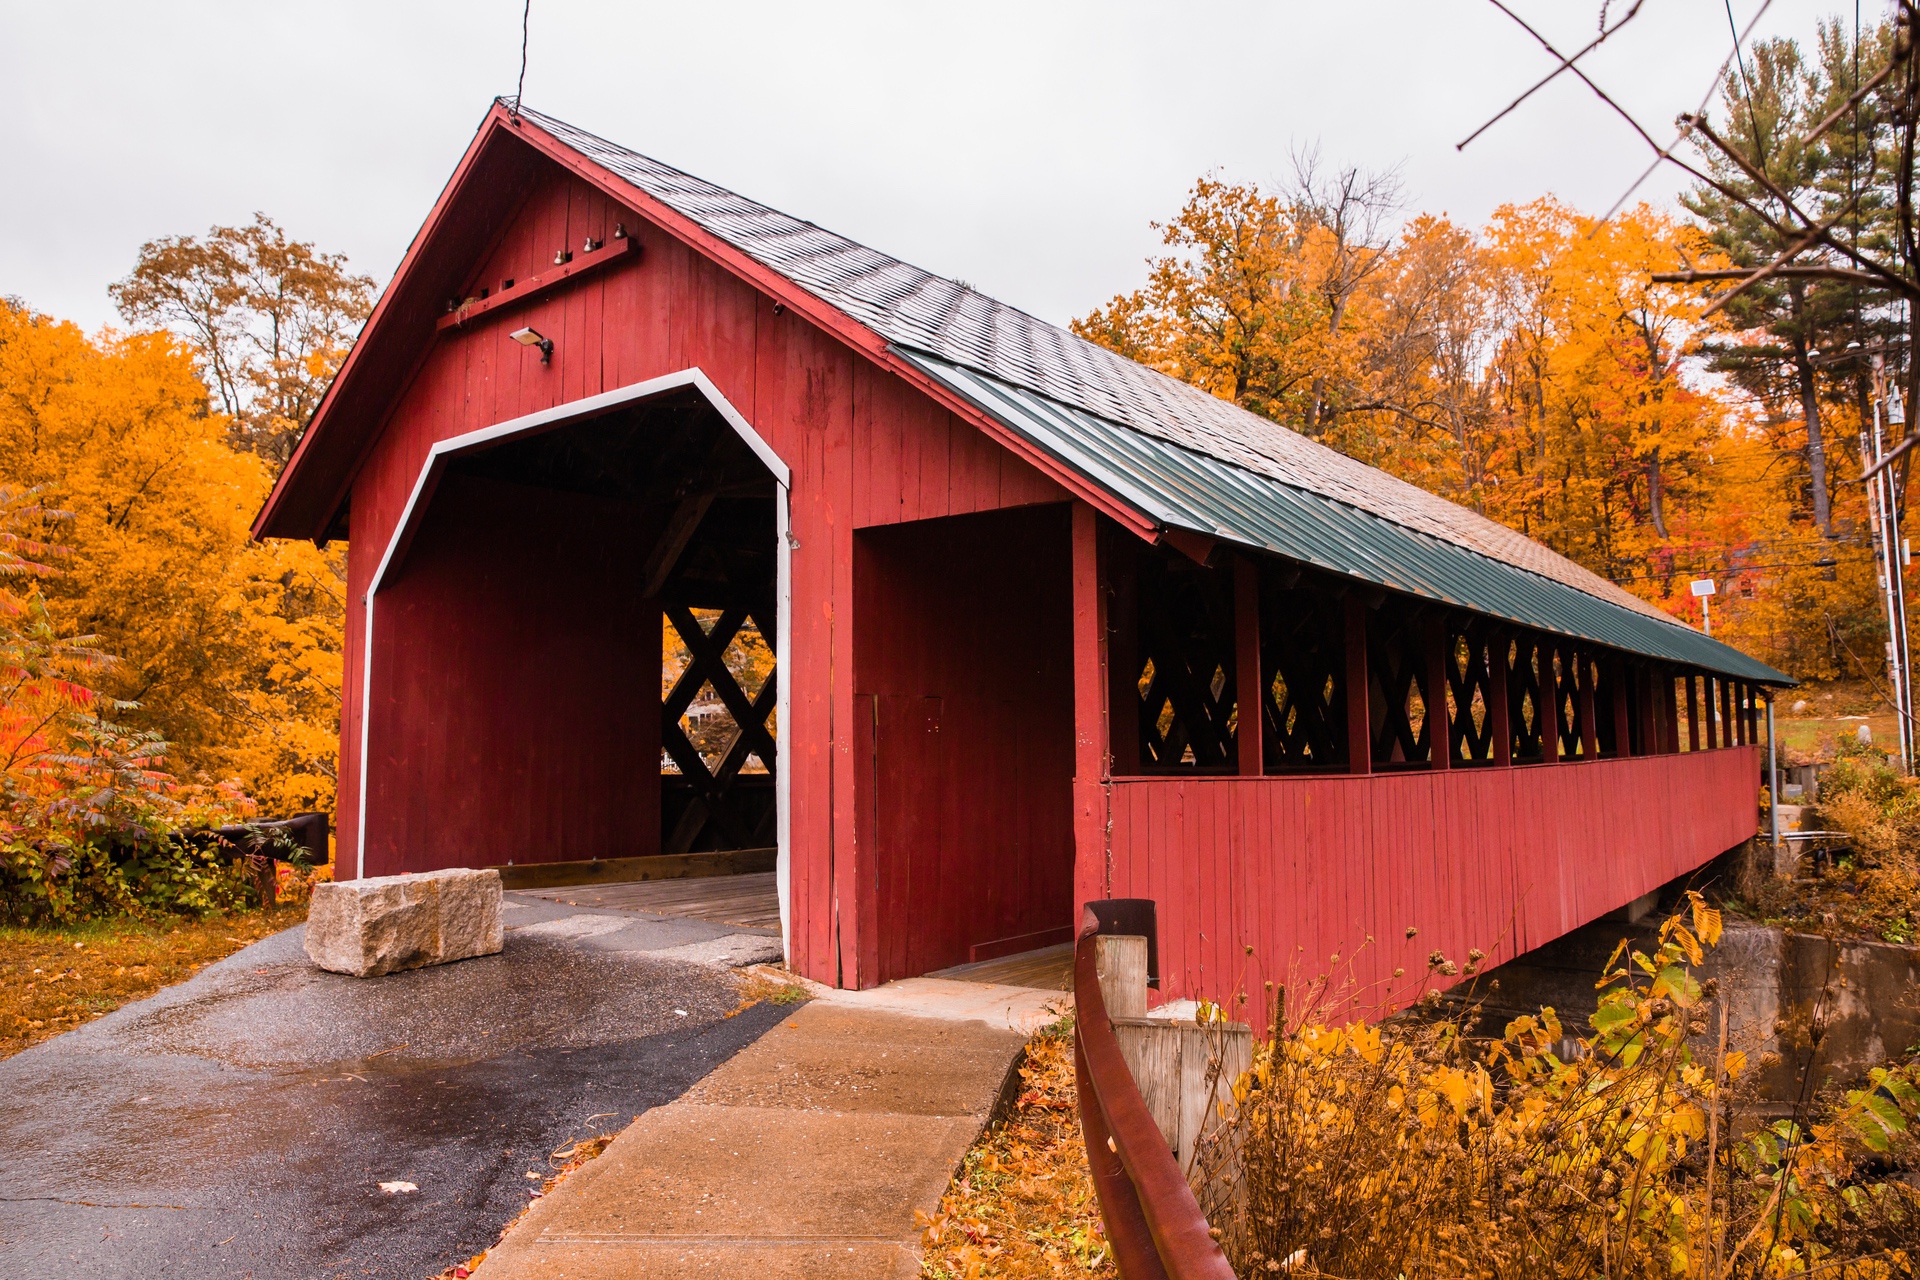 Beautiful Vermont covered bridge surrounded by colorful fall foliage.